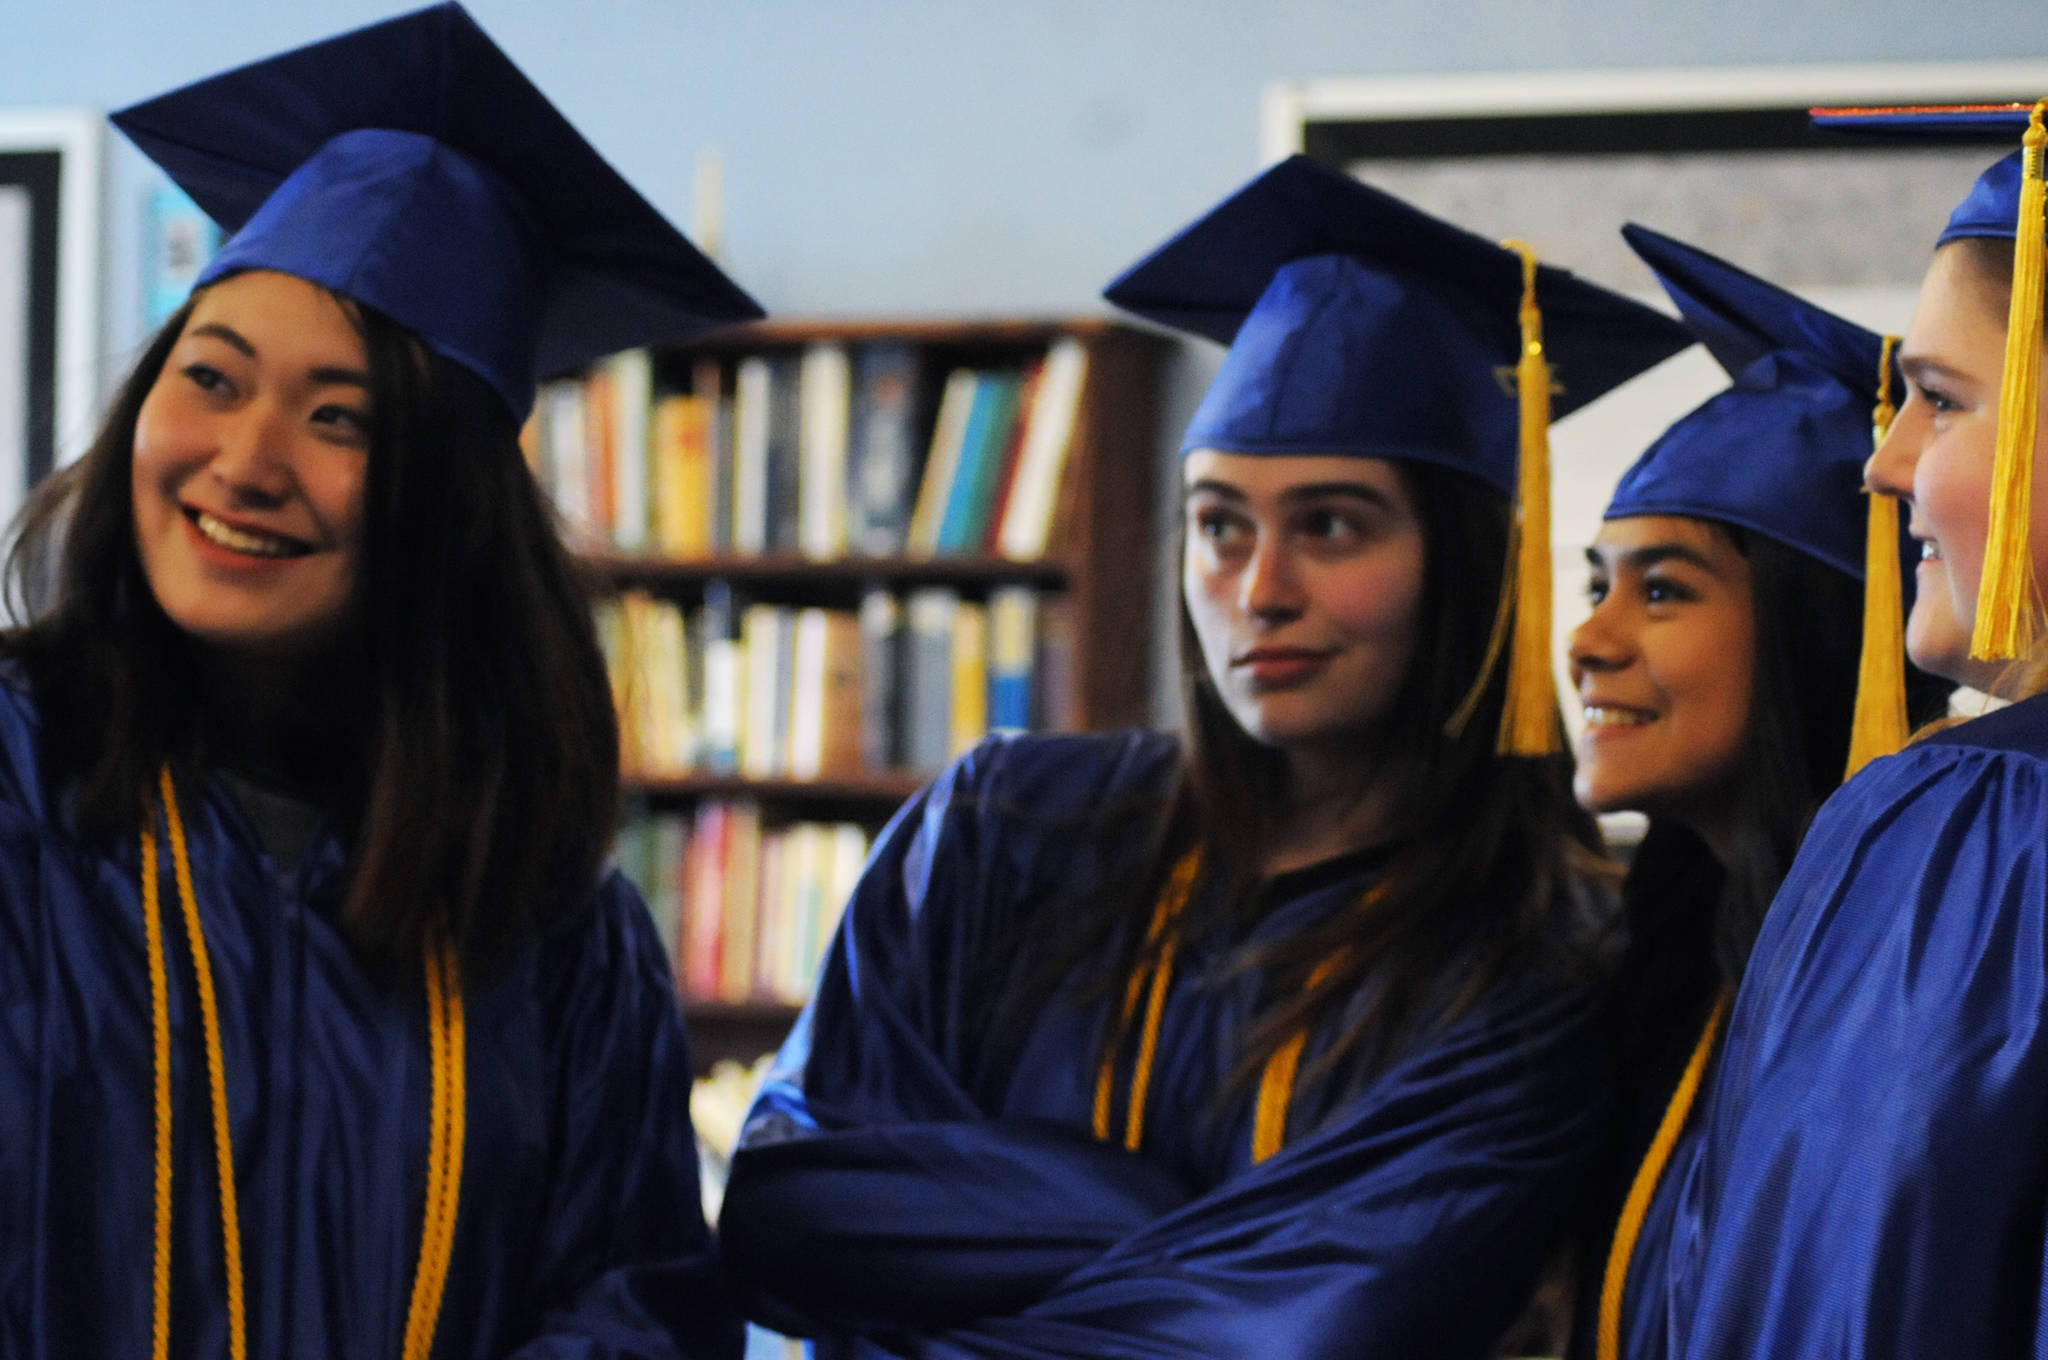 The four female graduates from Cook Inlet Academy pause to take a selfie before their graduation ceremony Sunday, May 7, 2017 in Soldotna, Alaska. (Elizabeth Earl/Peninsula Clarion)  The four female graduates from Cook Inlet Academy pause to take a selfie before their graduation ceremony Sunday in Soldotna. (Elizabeth Earl/Peninsula Clarion)